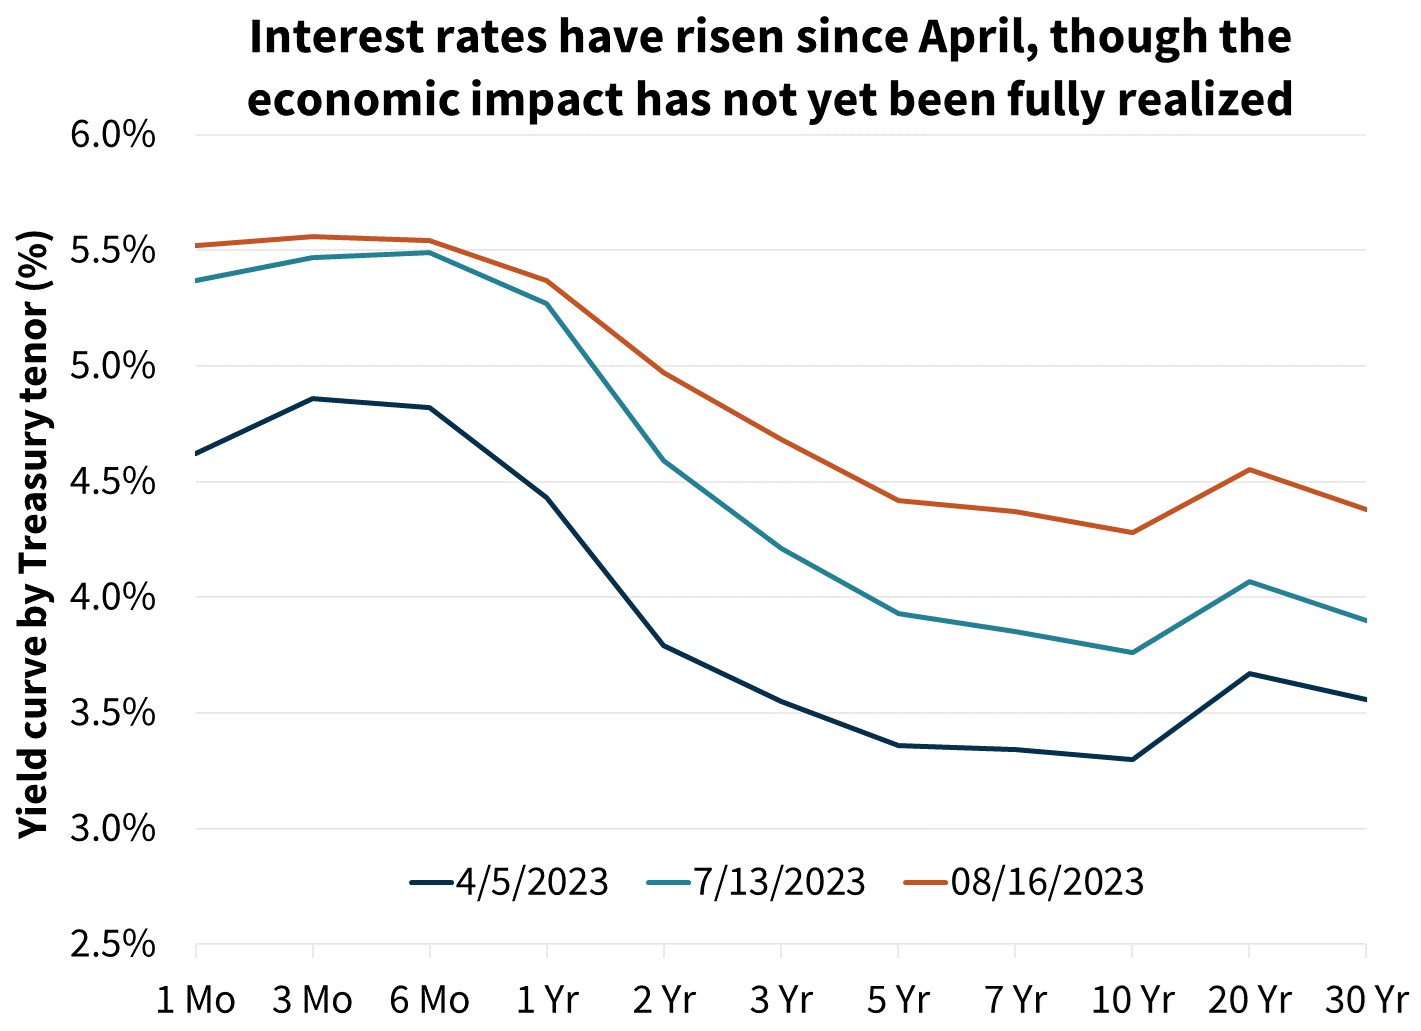  Interest rates have risen since April, though the economic impact has not yet been fully realized
